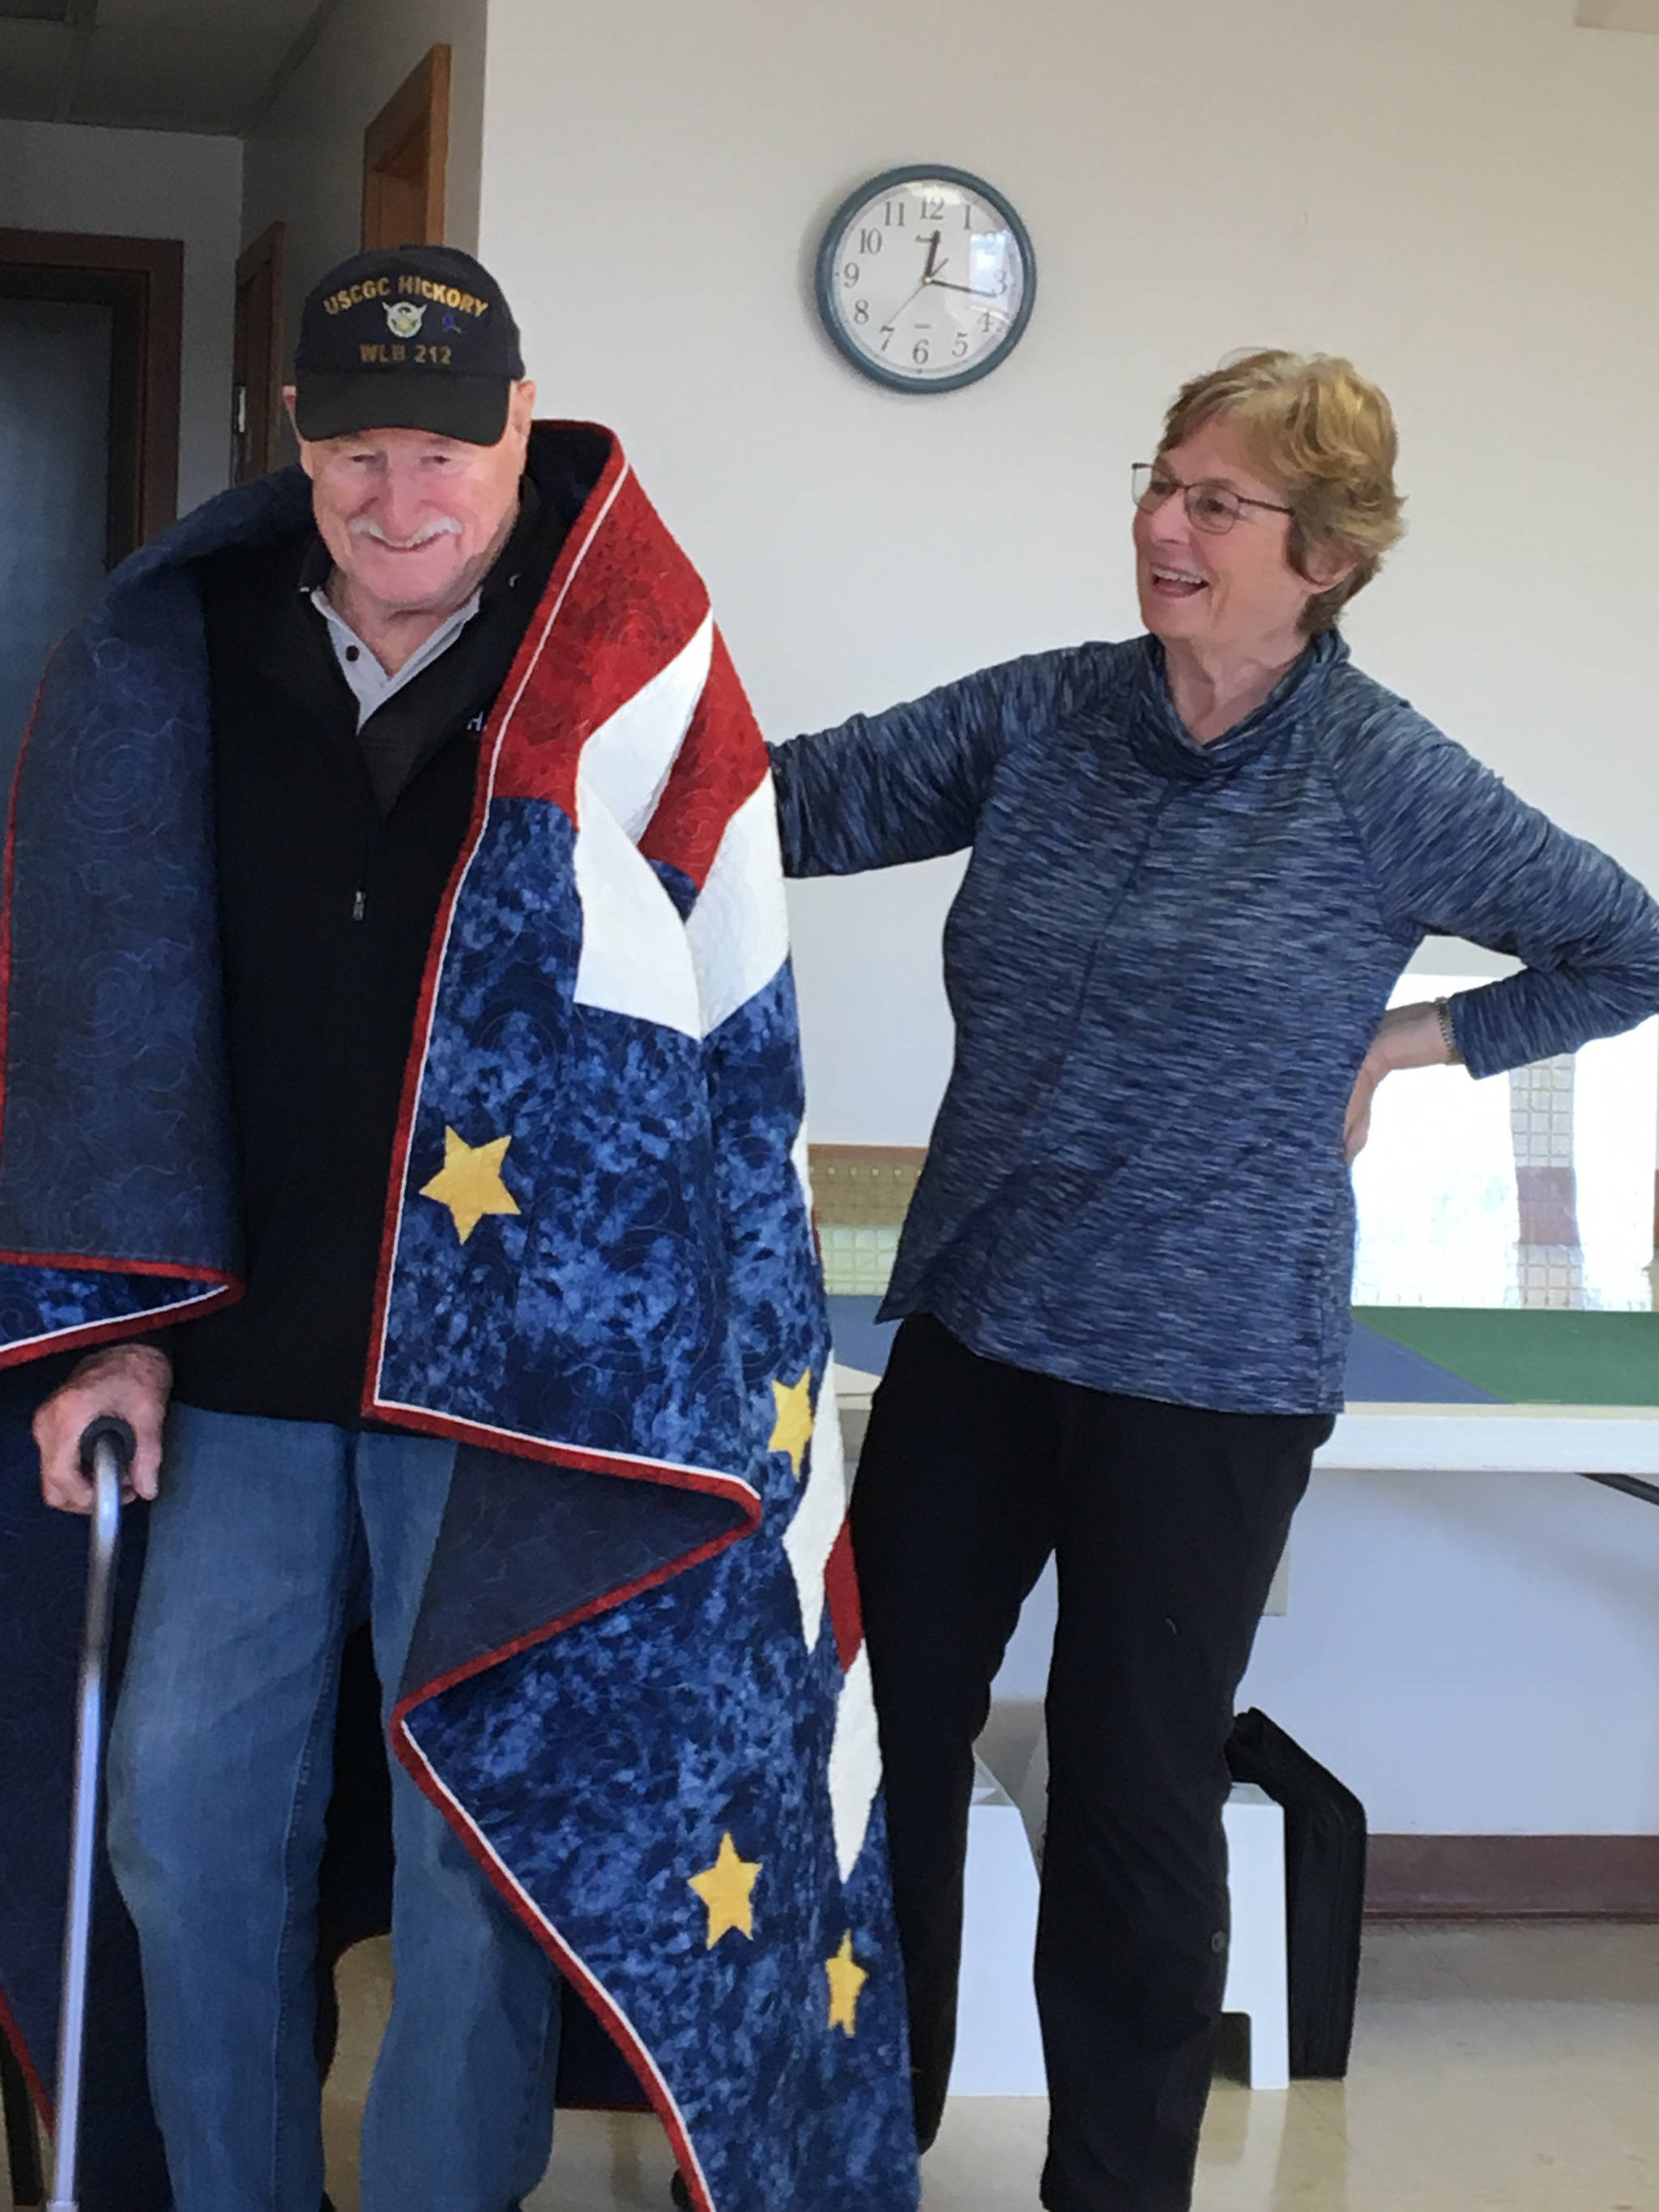 Lorraine Murphy, right, presents Sandy Mazen with a Quilt of Valor made by Kachemak Bay Quilters on April 4, 2019, at at Kachemak Community Center in Kachemak City, Alaska. (Photo provided)